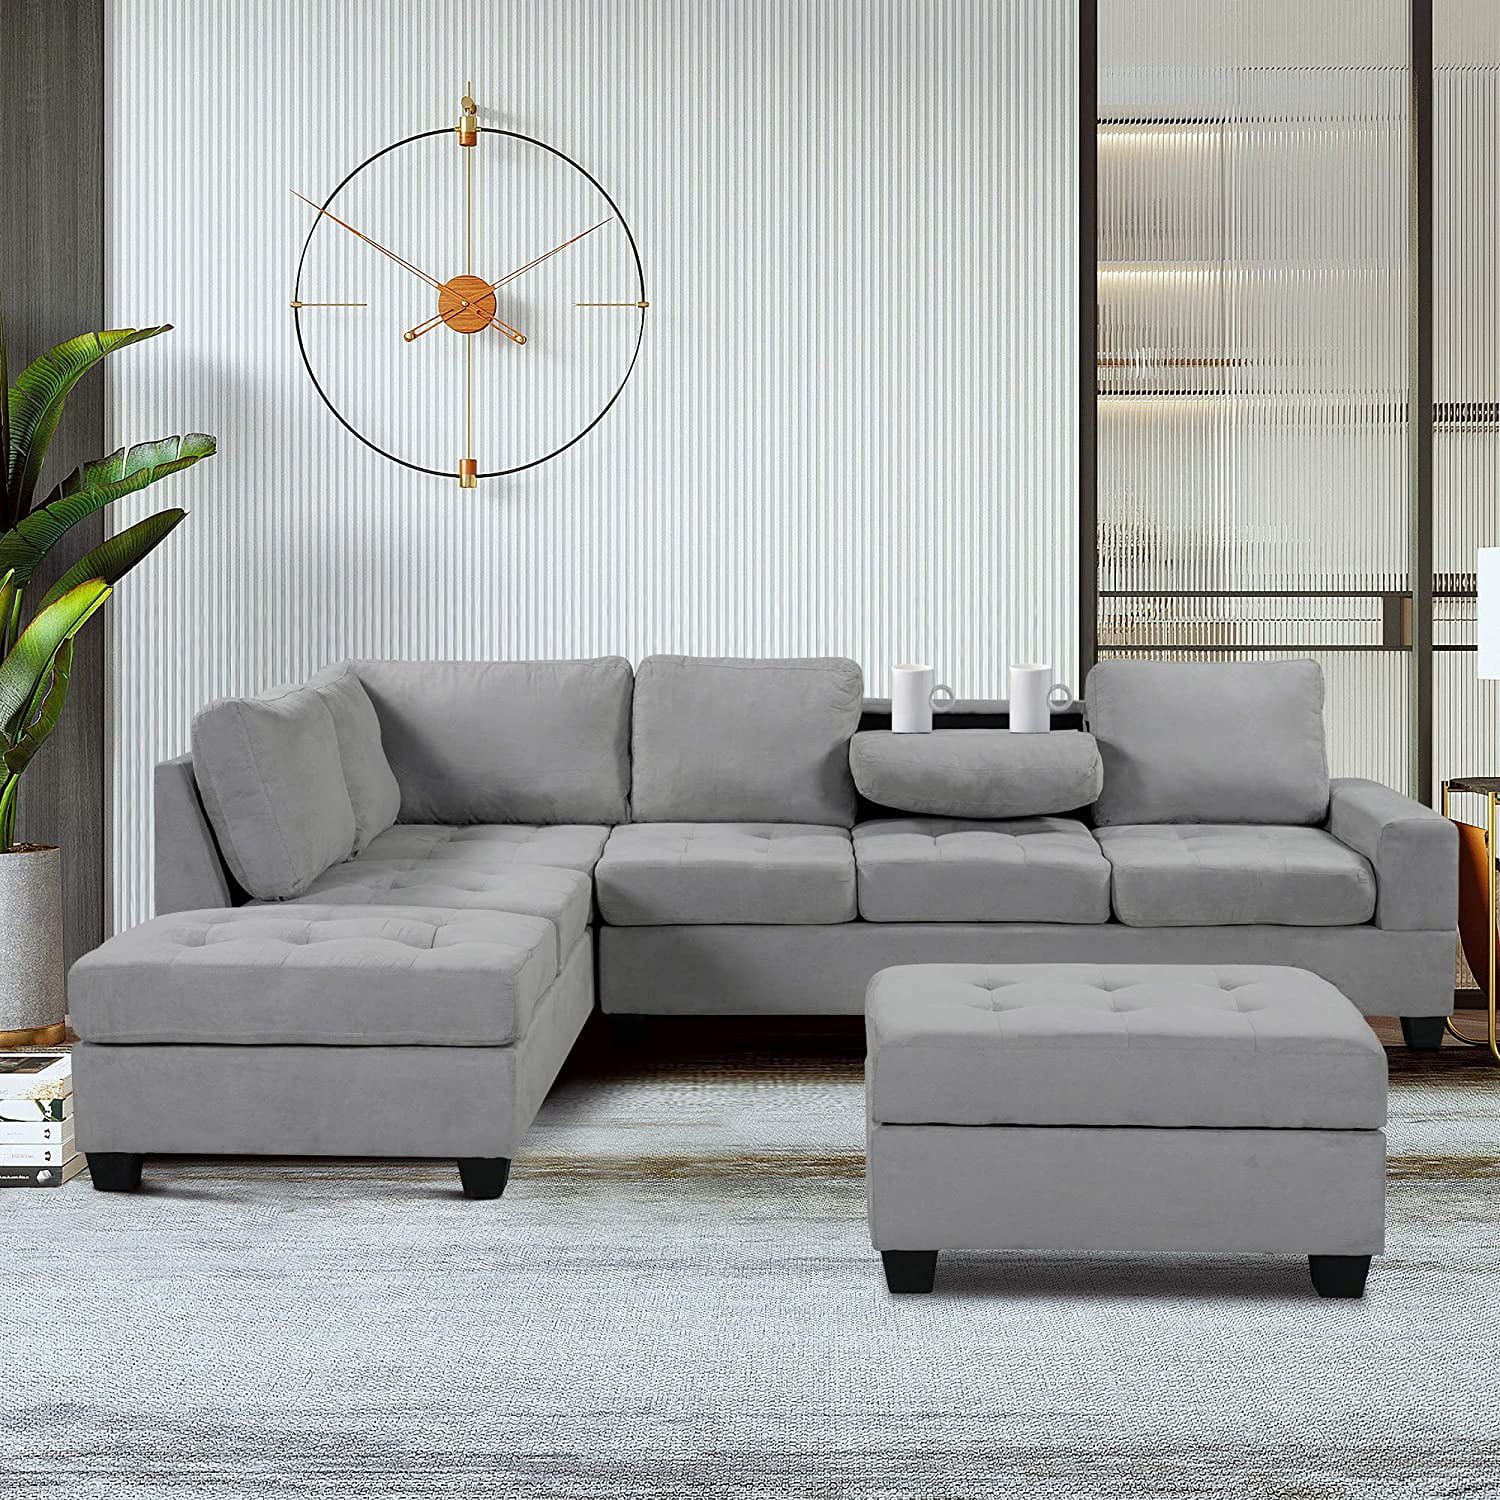 3 Piece Convertible Sectional Sofa L Shaped Couch With Reversible With Regard To 3 Seat Convertible Sectional Sofas (View 7 of 20)